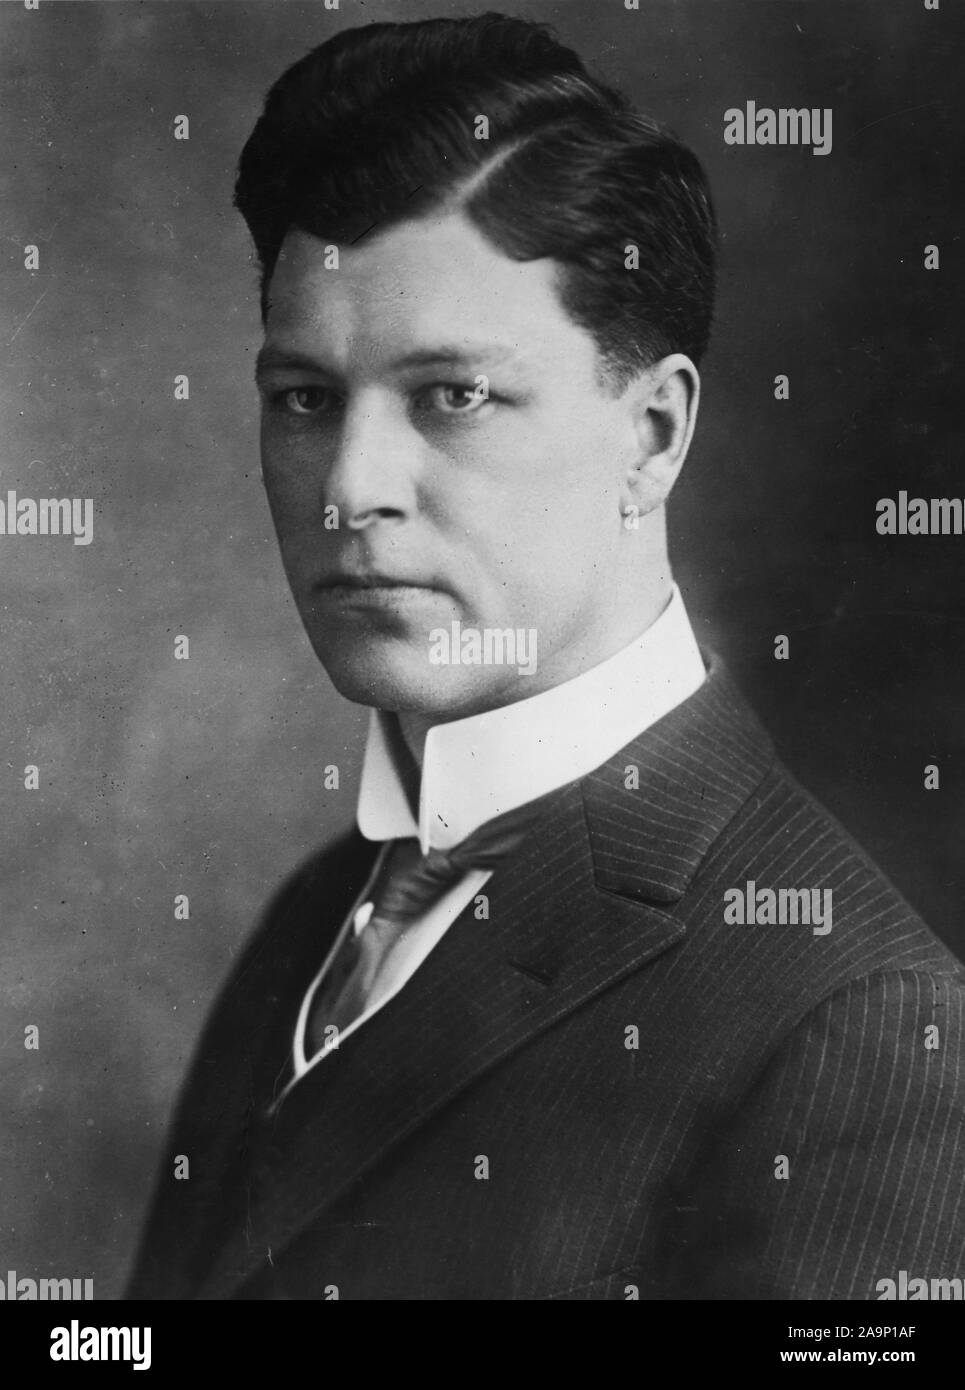 1918 - Arrest of Alien Enemies in U.S.A. - Jeremiah O'Leary named in government's expose of German plots. Jeremiah A. O'Leary of the American Truth Society and a leader in Irish-American circles whose named had been mentioned in the Government's disclosure of German plots Stock Photo